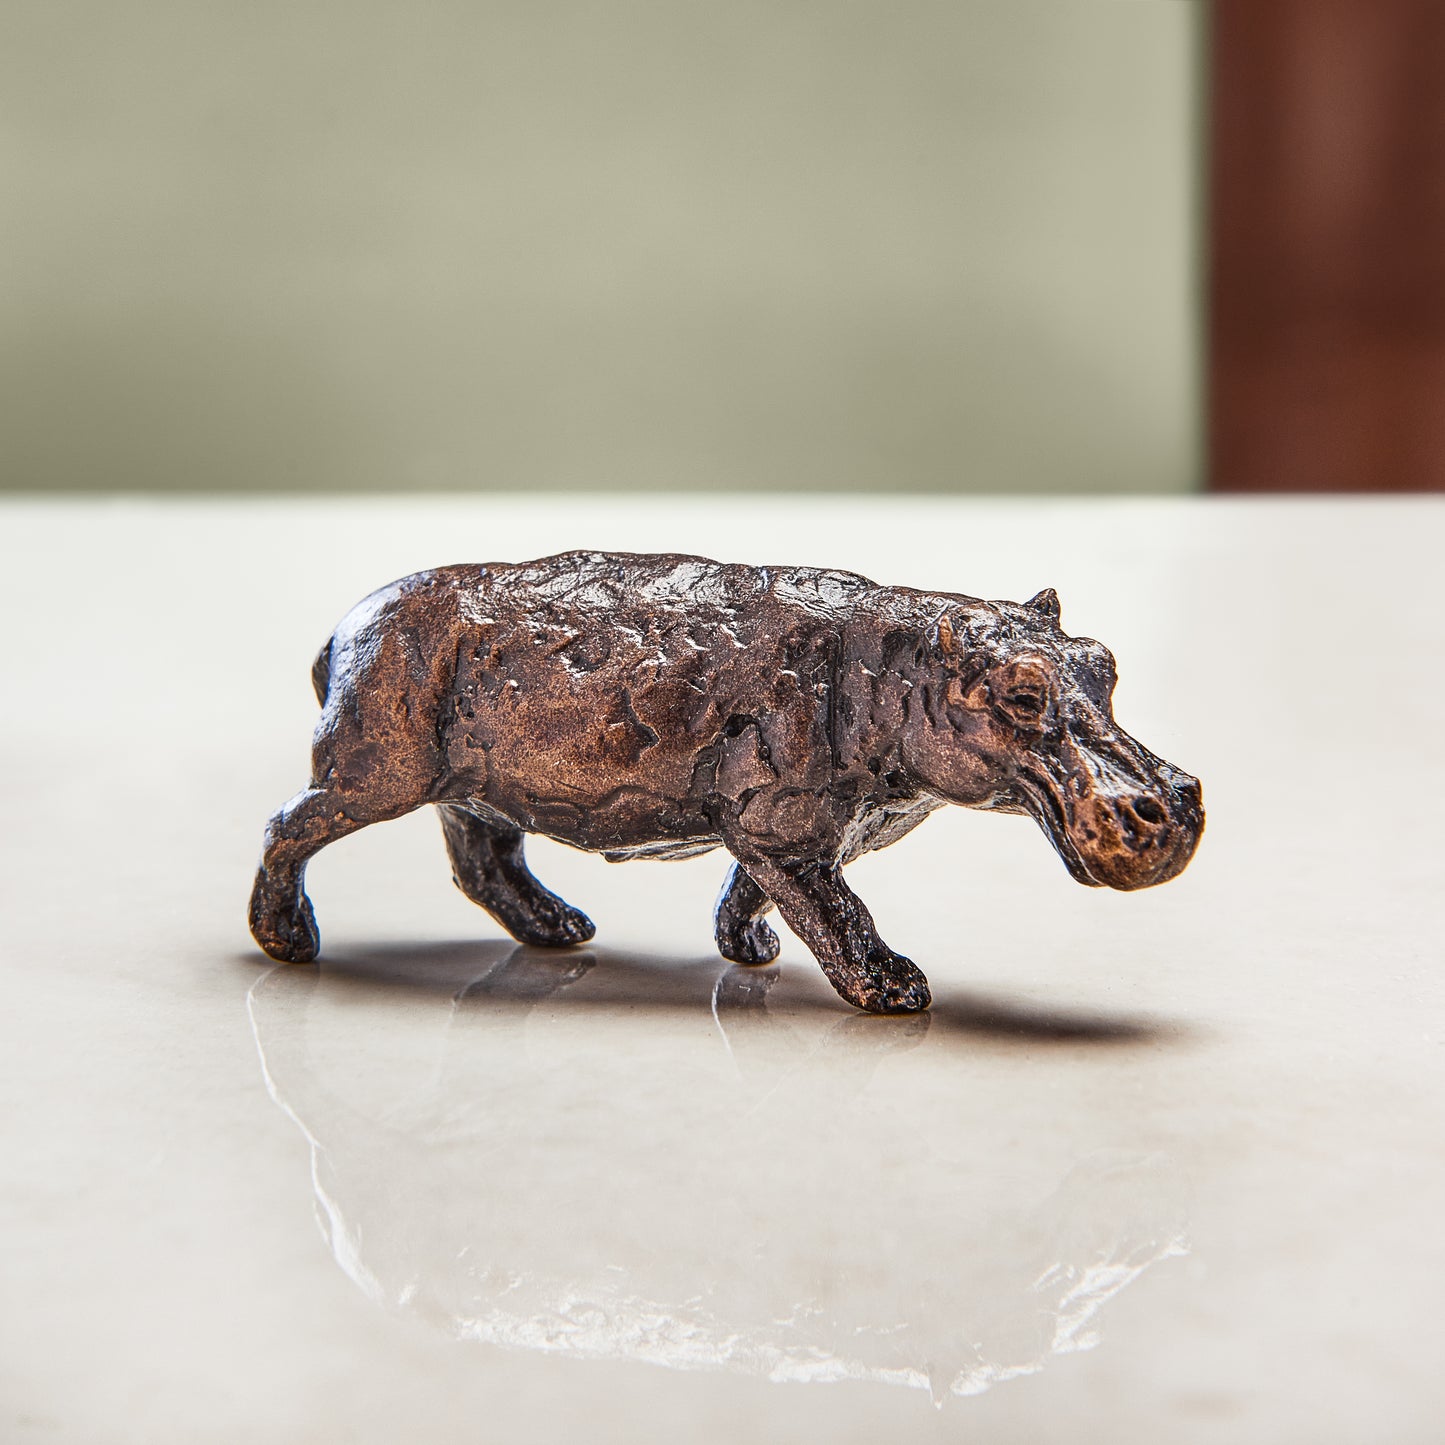 Miniature bronze figurine of a hippo. Give as a bronze anniversary gift or thoughtful birthday gift.